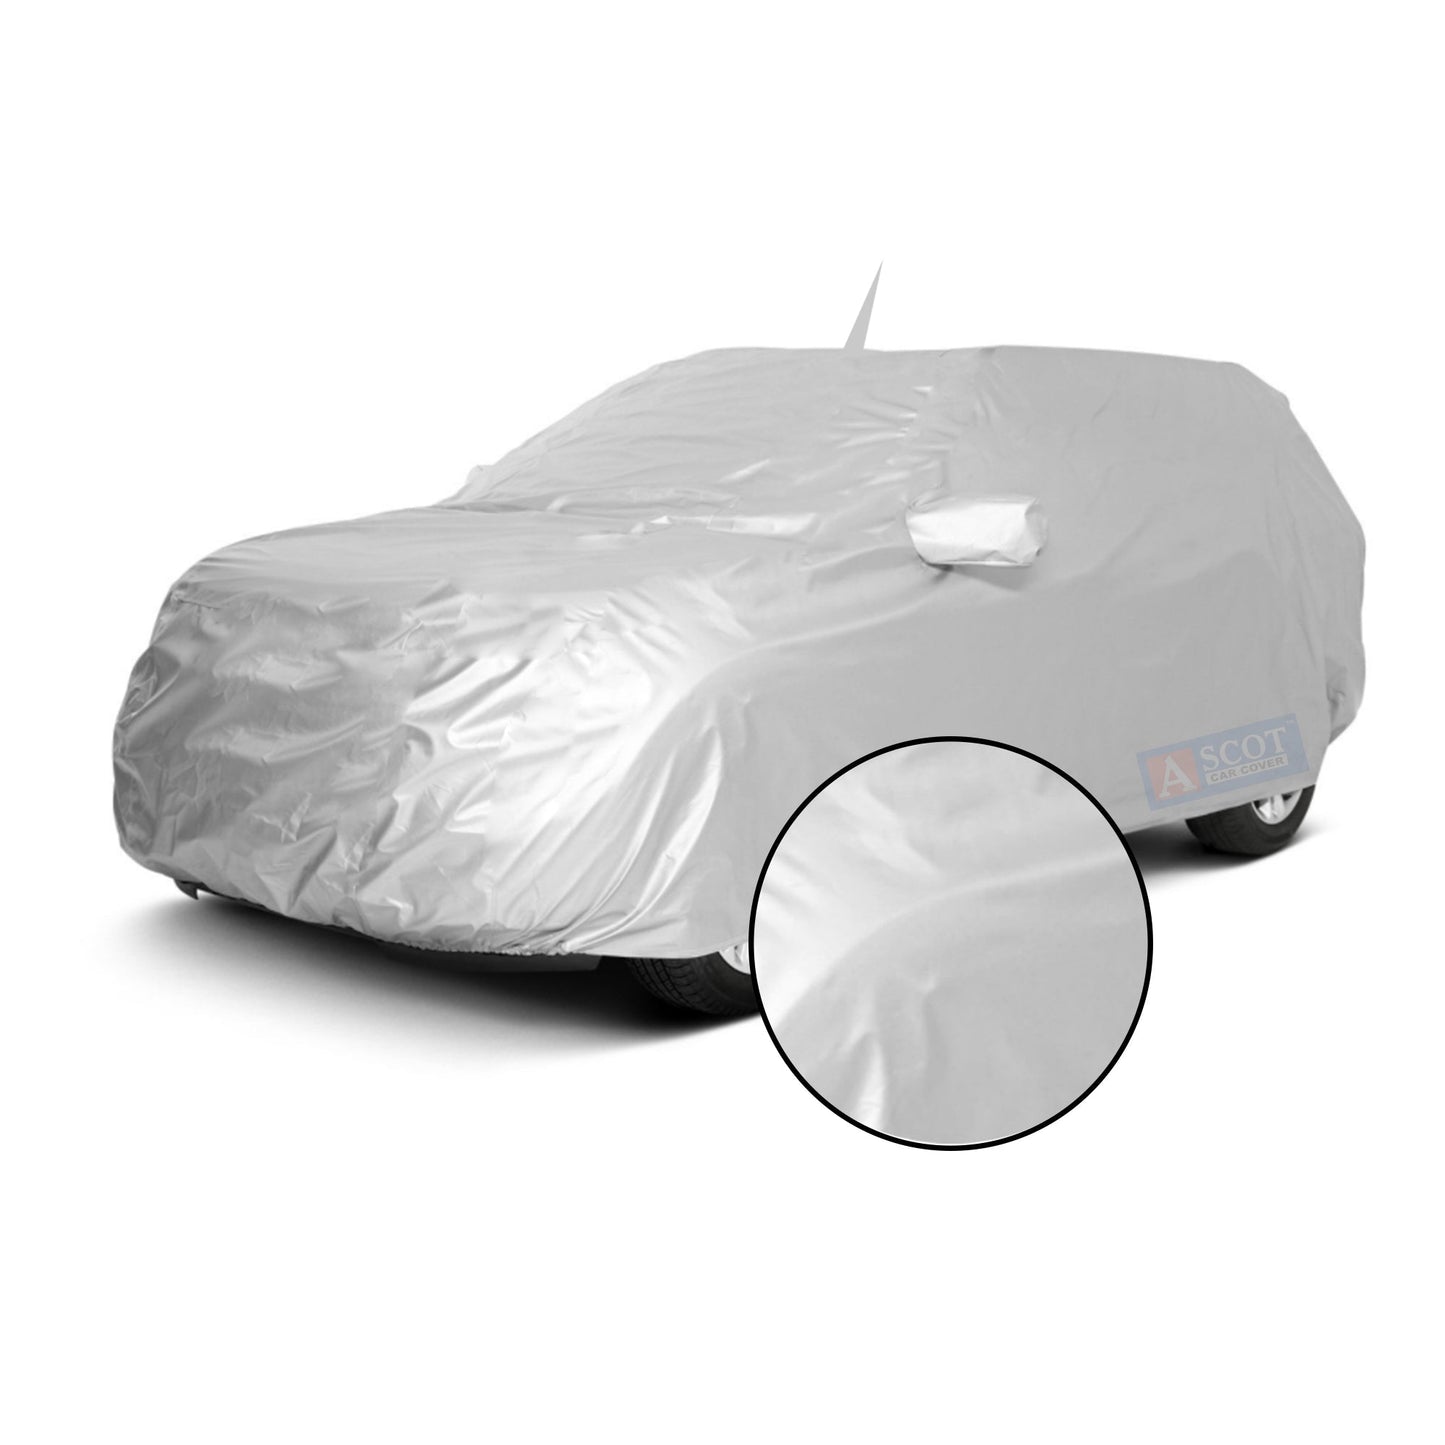 Ascot Mercedes-Benz S-Class Limousine 2014-2020 Model Car Body Cover Dust Proof, Trippel Stitched